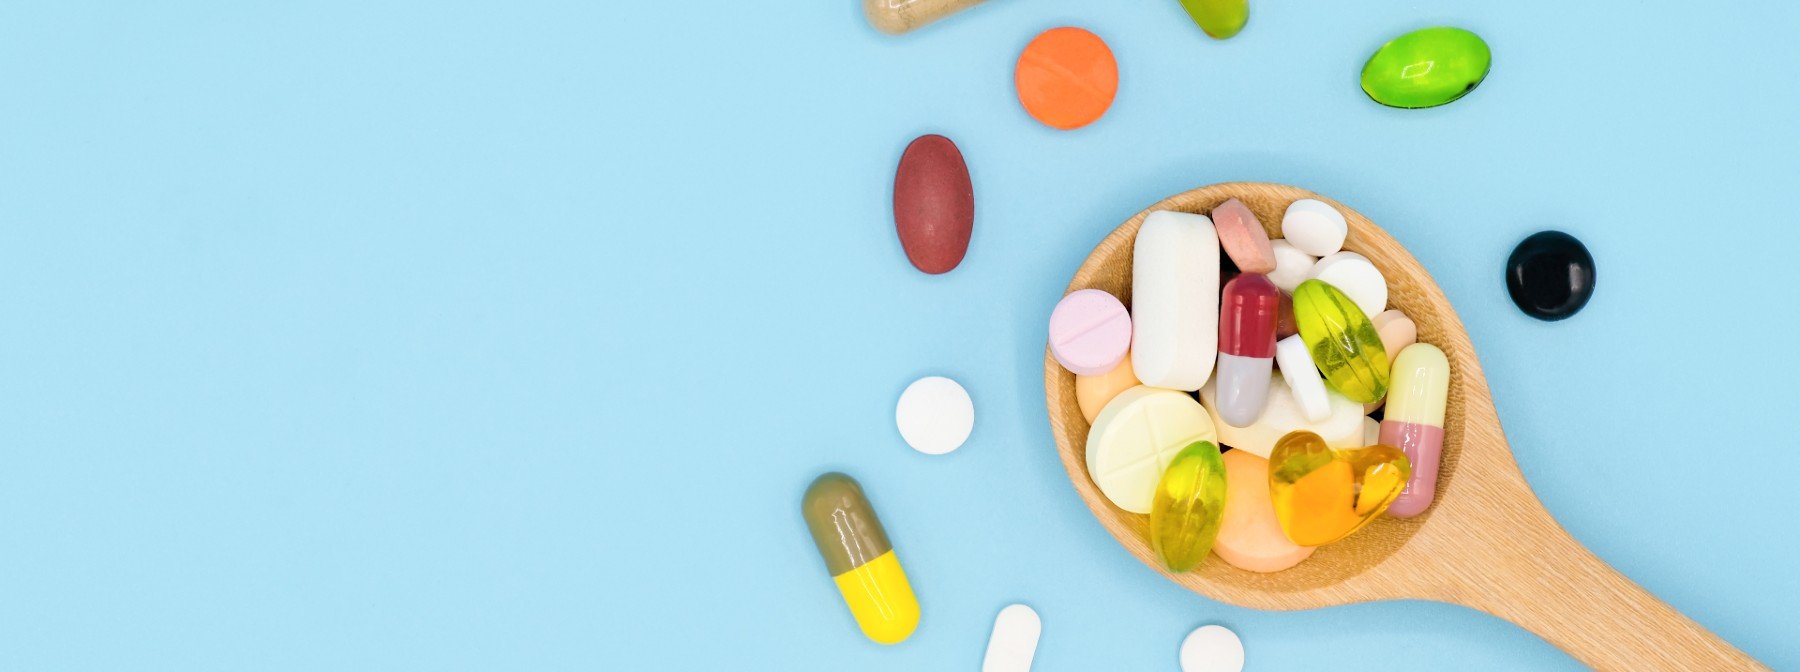 Multivitamins for Women | What do You Need?